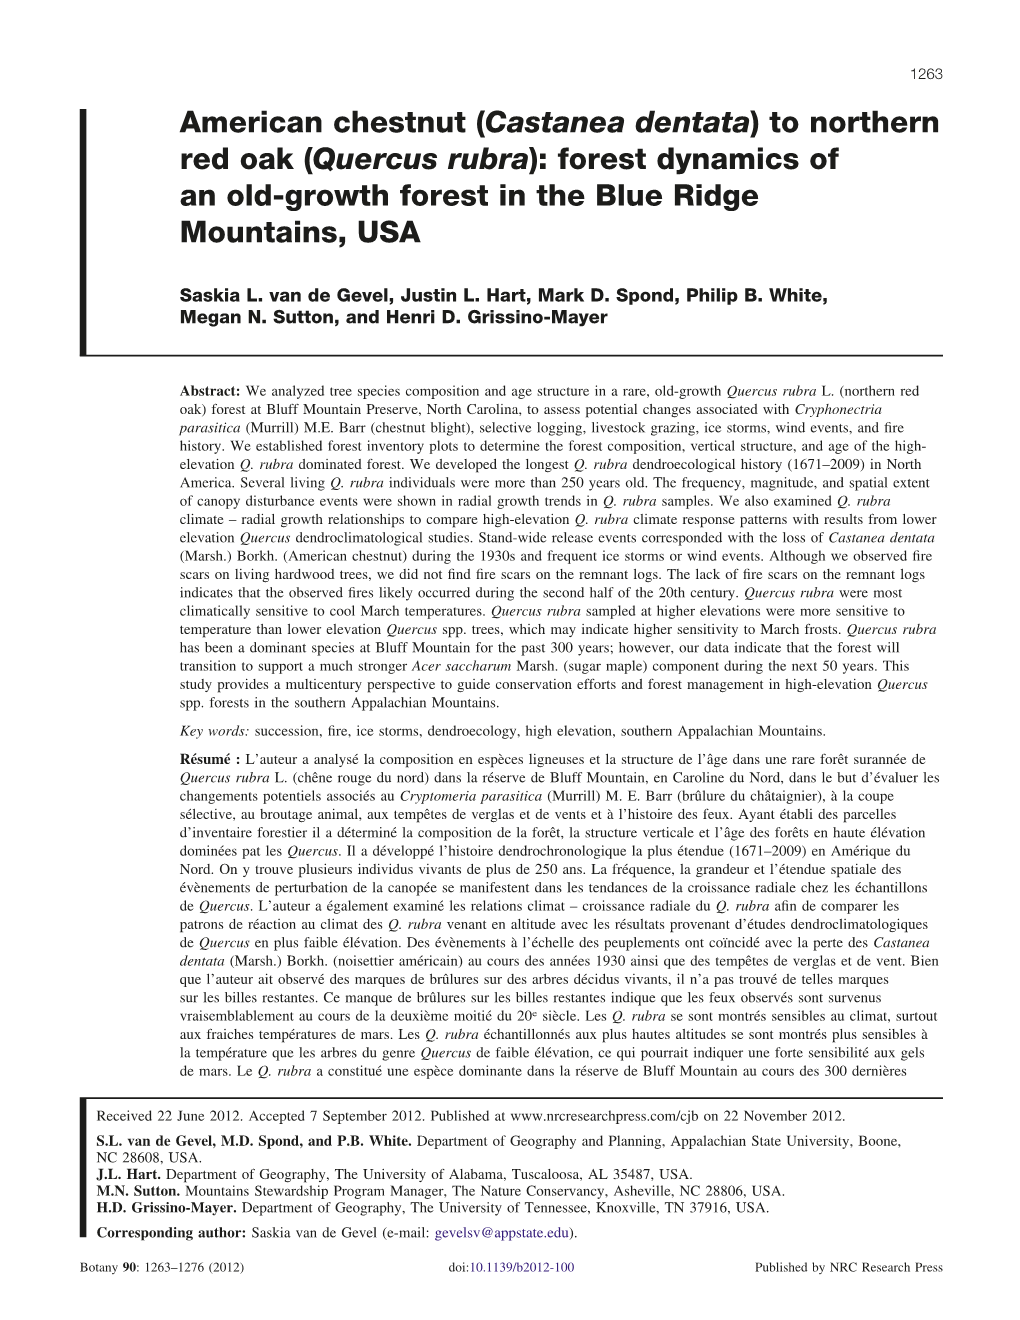 American Chestnut (Castanea Dentata) to Northern Red Oak (Quercus Rubra): Forest Dynamics of an Old-Growth Forest in the Blue Ridge Mountains, USA